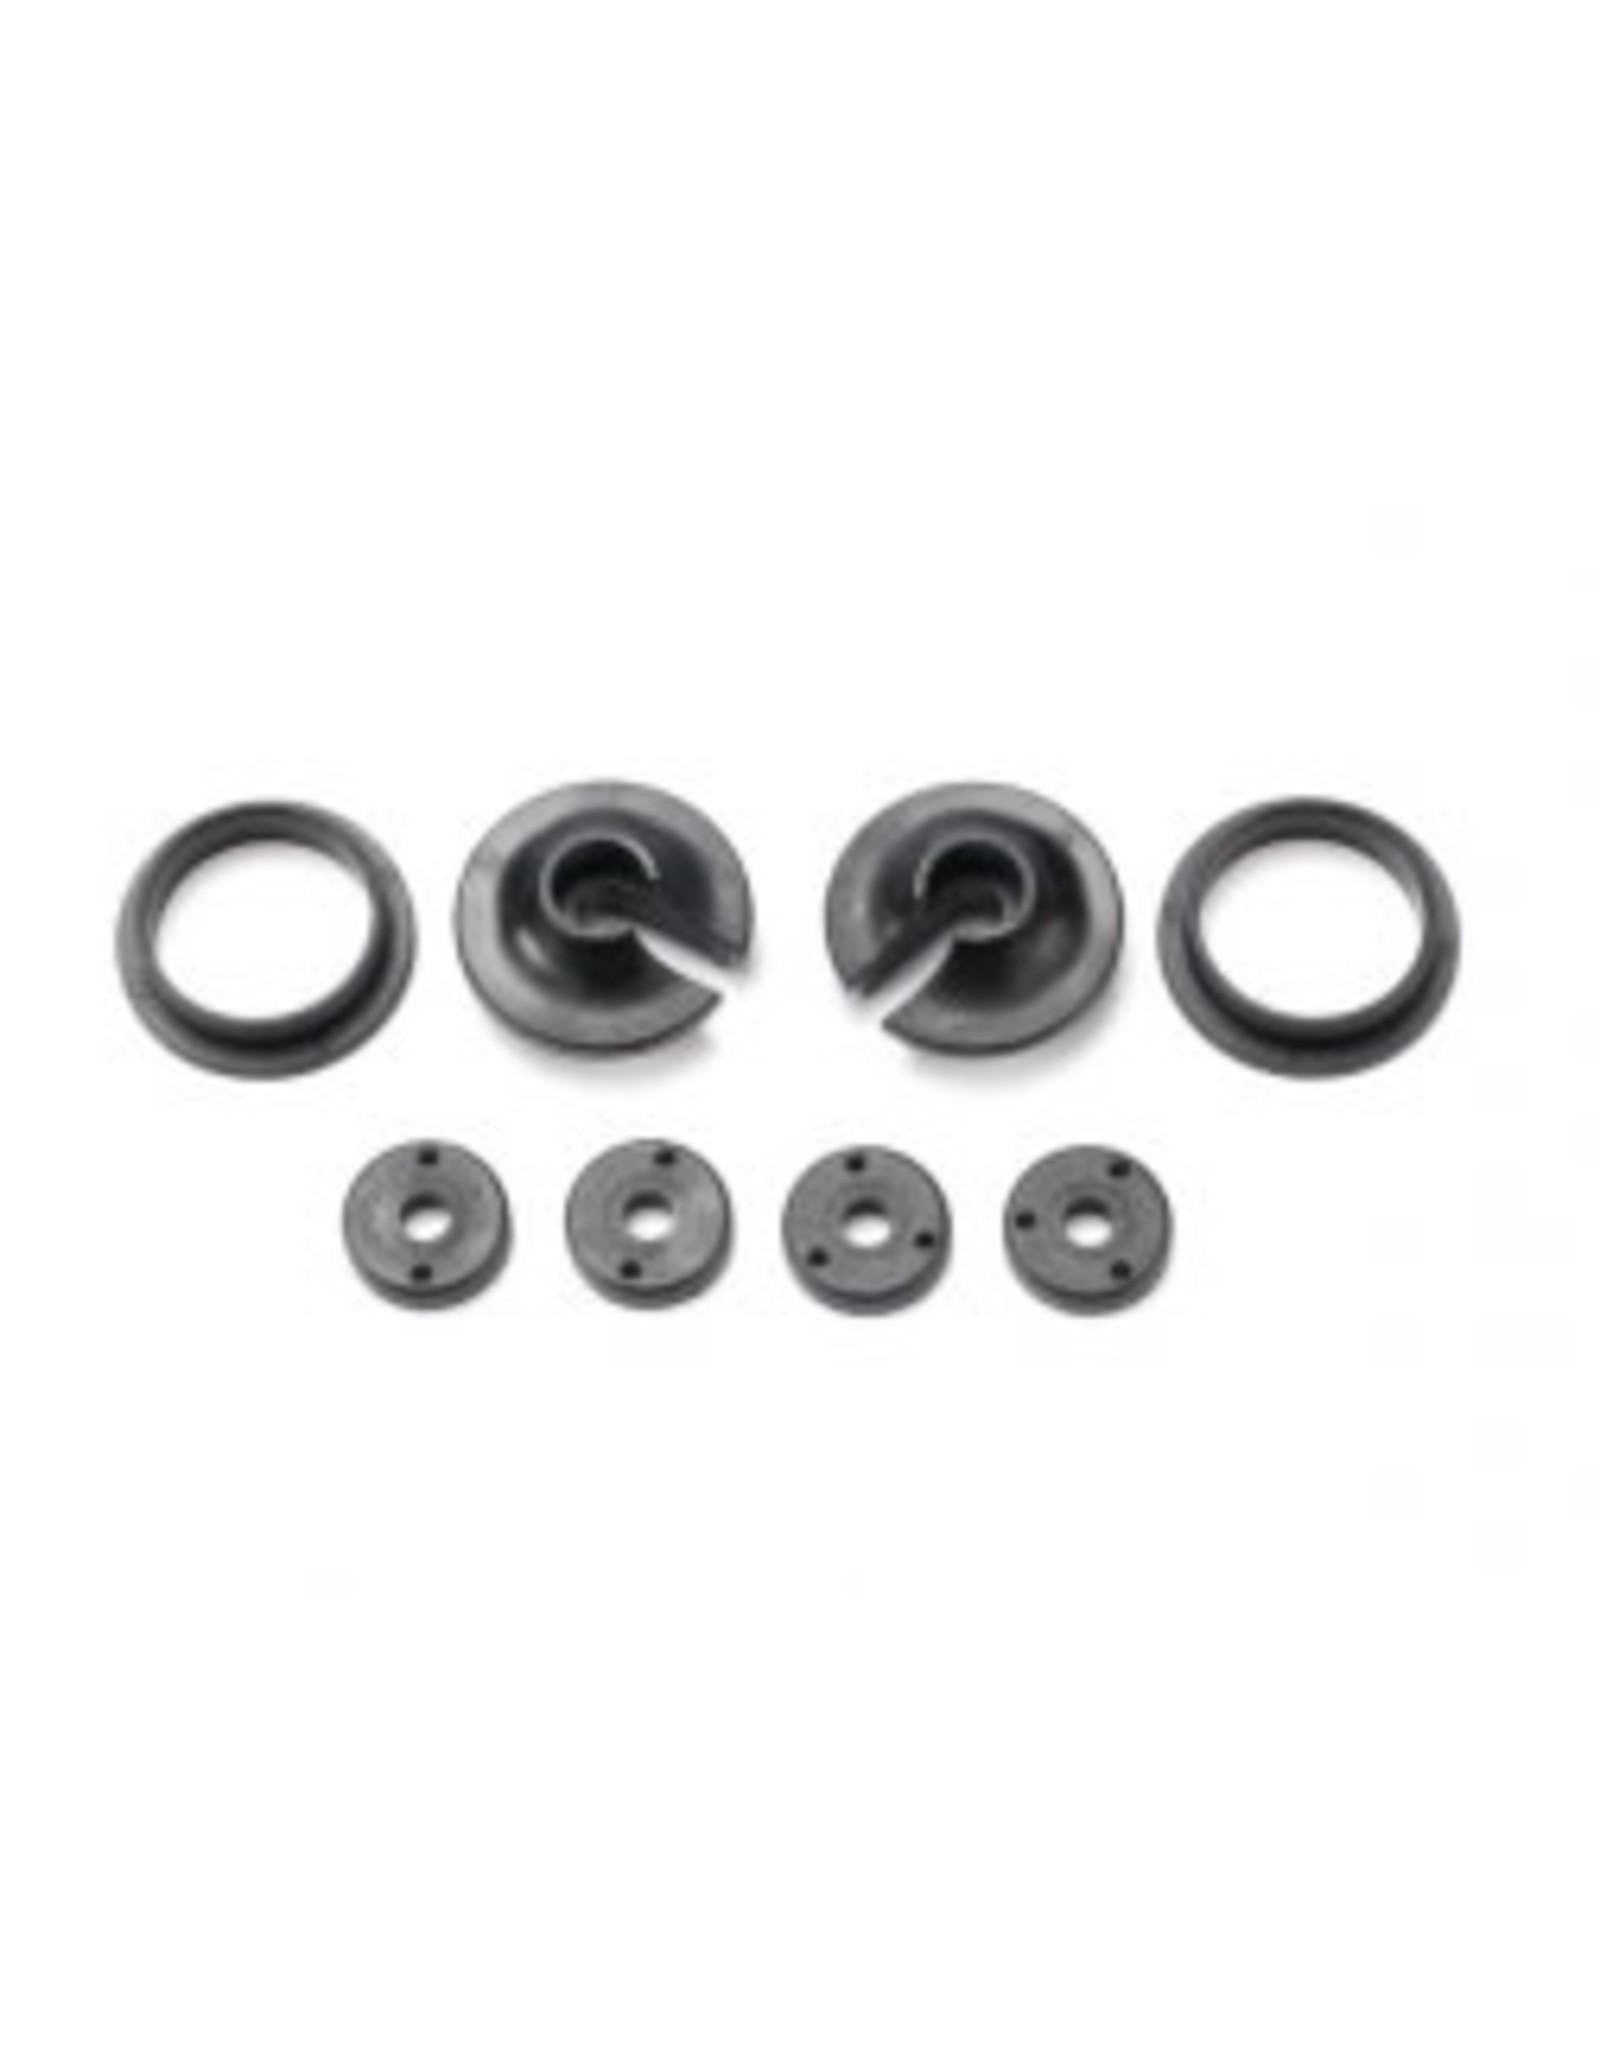 Traxxas [Spring retainers, upper & lower (2)/ piston head set (2-hole (2)/ 3-hole (2))] Spring retainers, upper & lower (2)/ piston head set (2-hole (2)/ 3-hole (2))